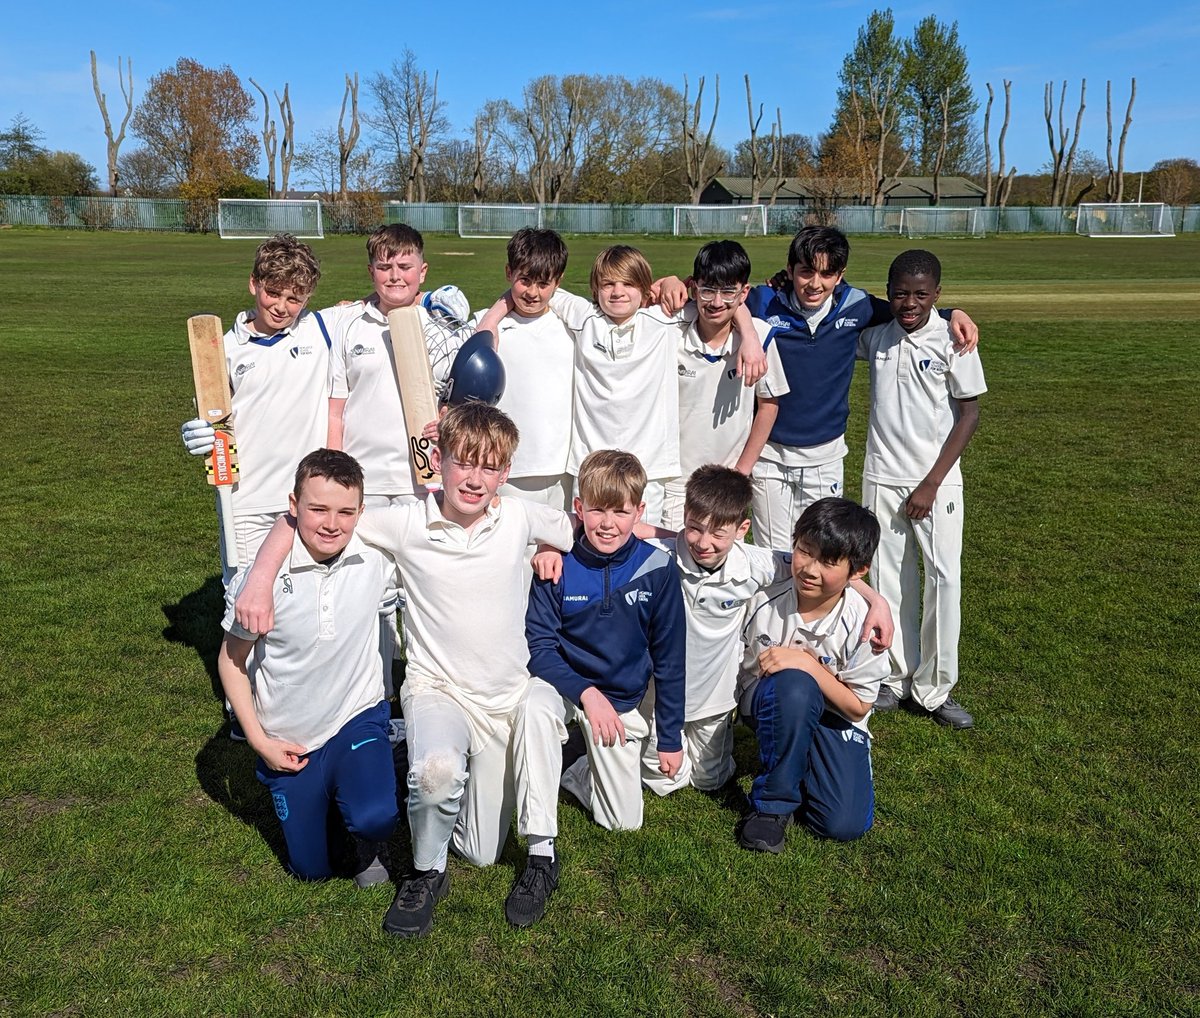 Well done to the Y7 A team who started the term off with an excellent team performance last week. A number of magic moments including a 50 run partnership between Henry B & Monty M and a quick fire 24 from Charlie W 🏏